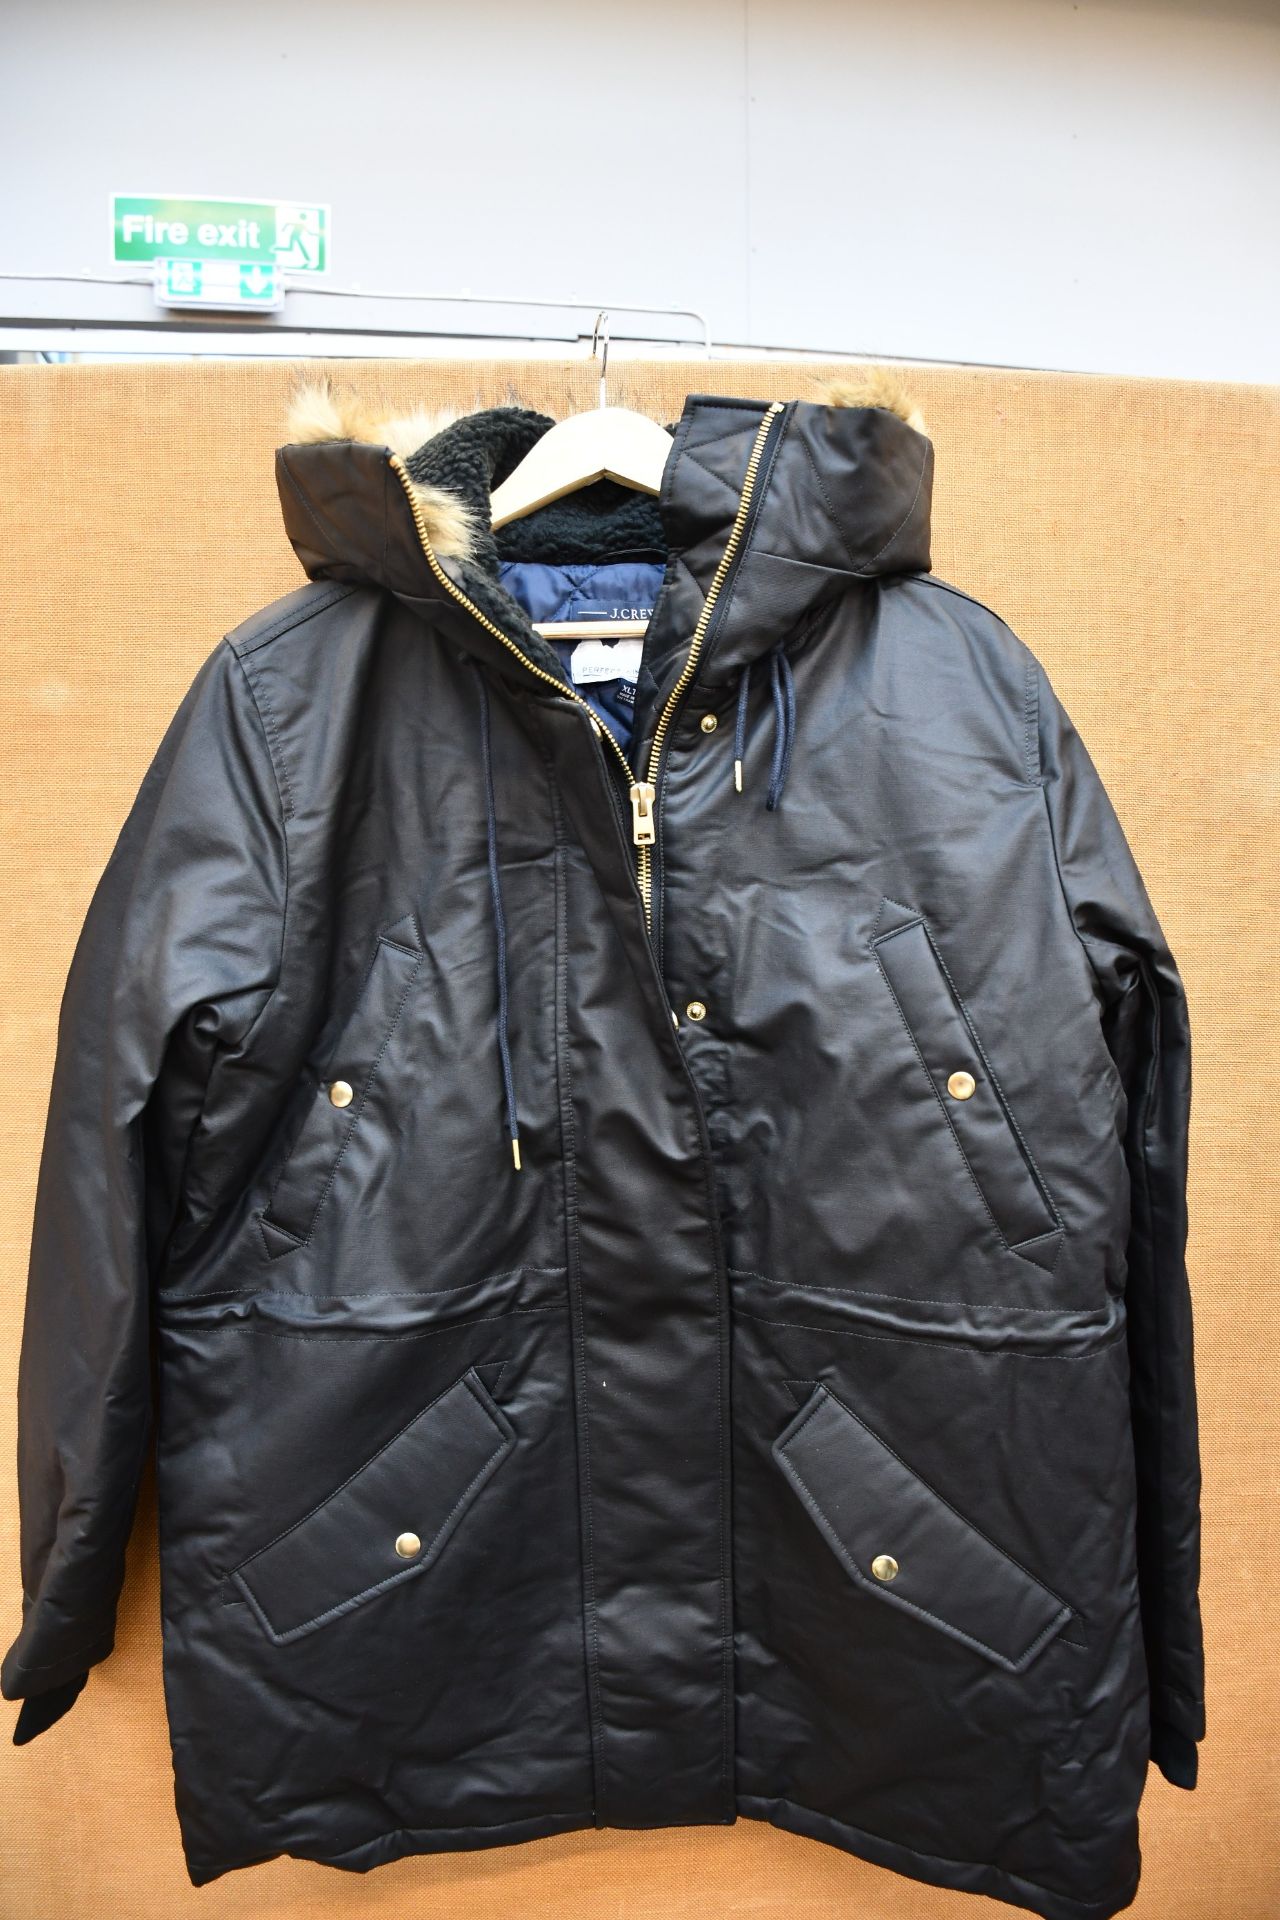 An as new J.Crew Perfect winter parka with eco-friendly PrimaLoft (XL -RRP £391).